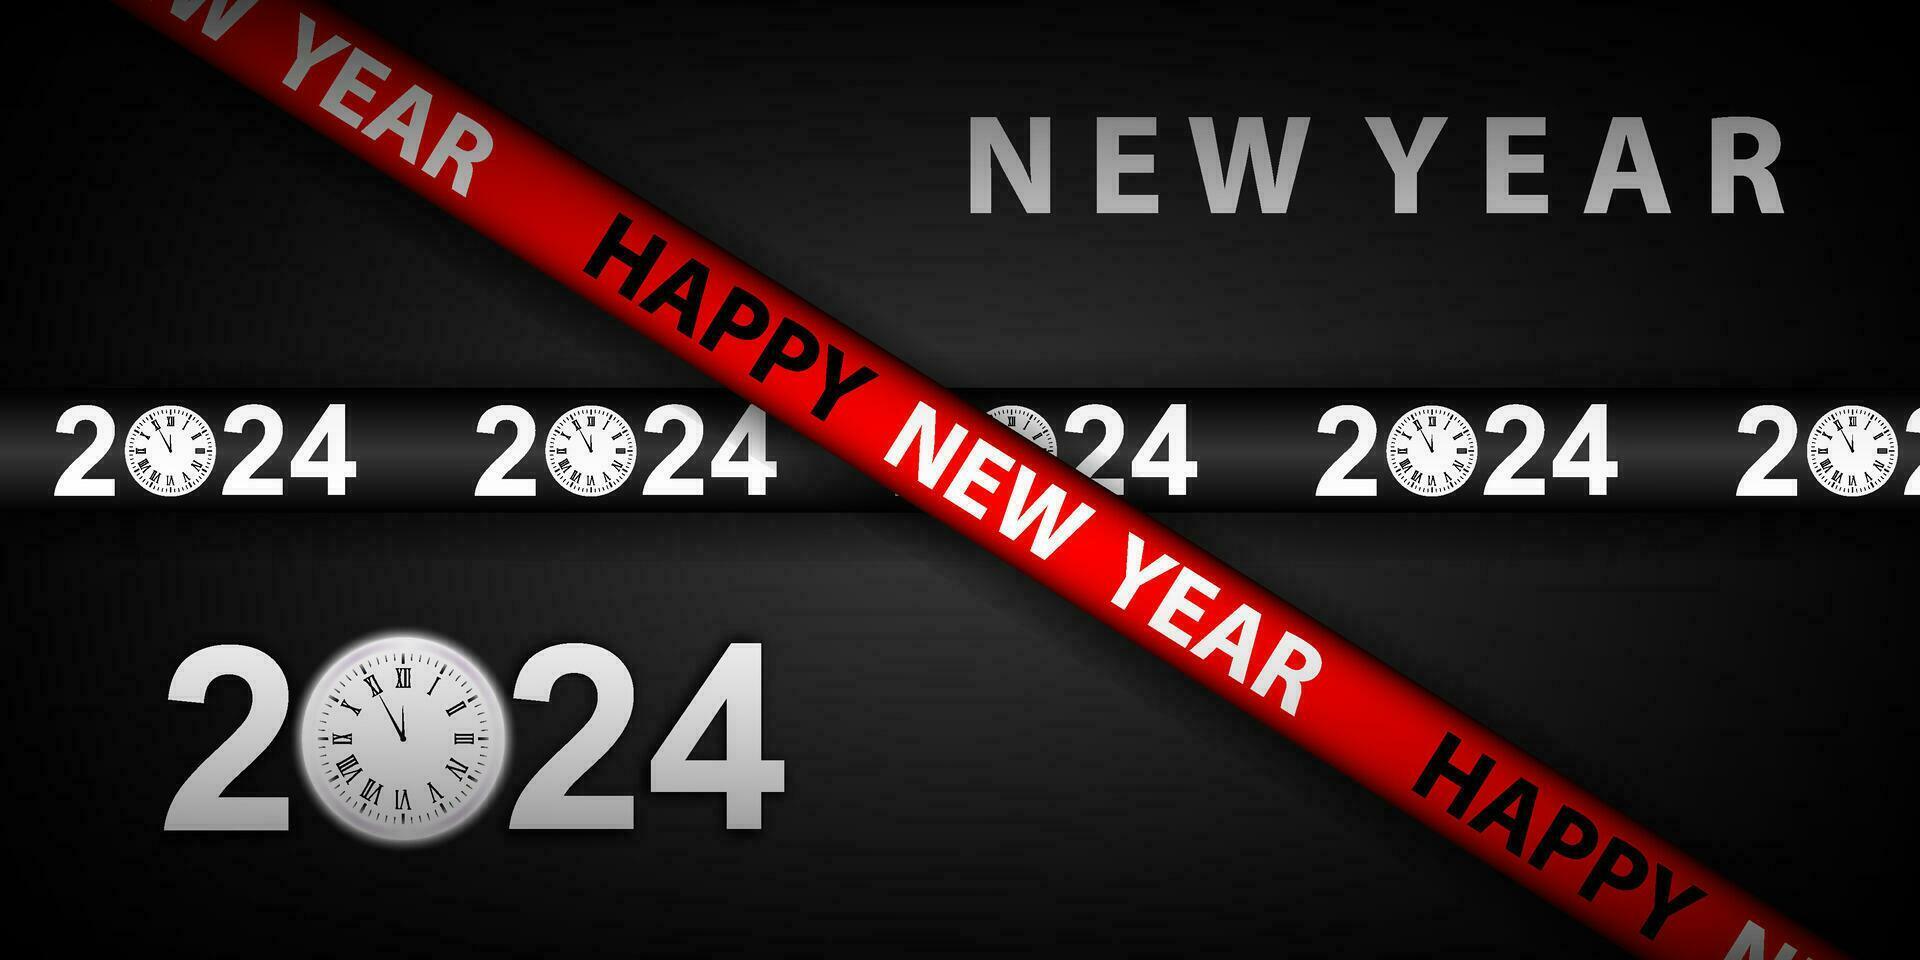 Happy New Year 2024 Background Design with ribbon lines. Greeting Cards, Banners, Posters. Vector Illustration.